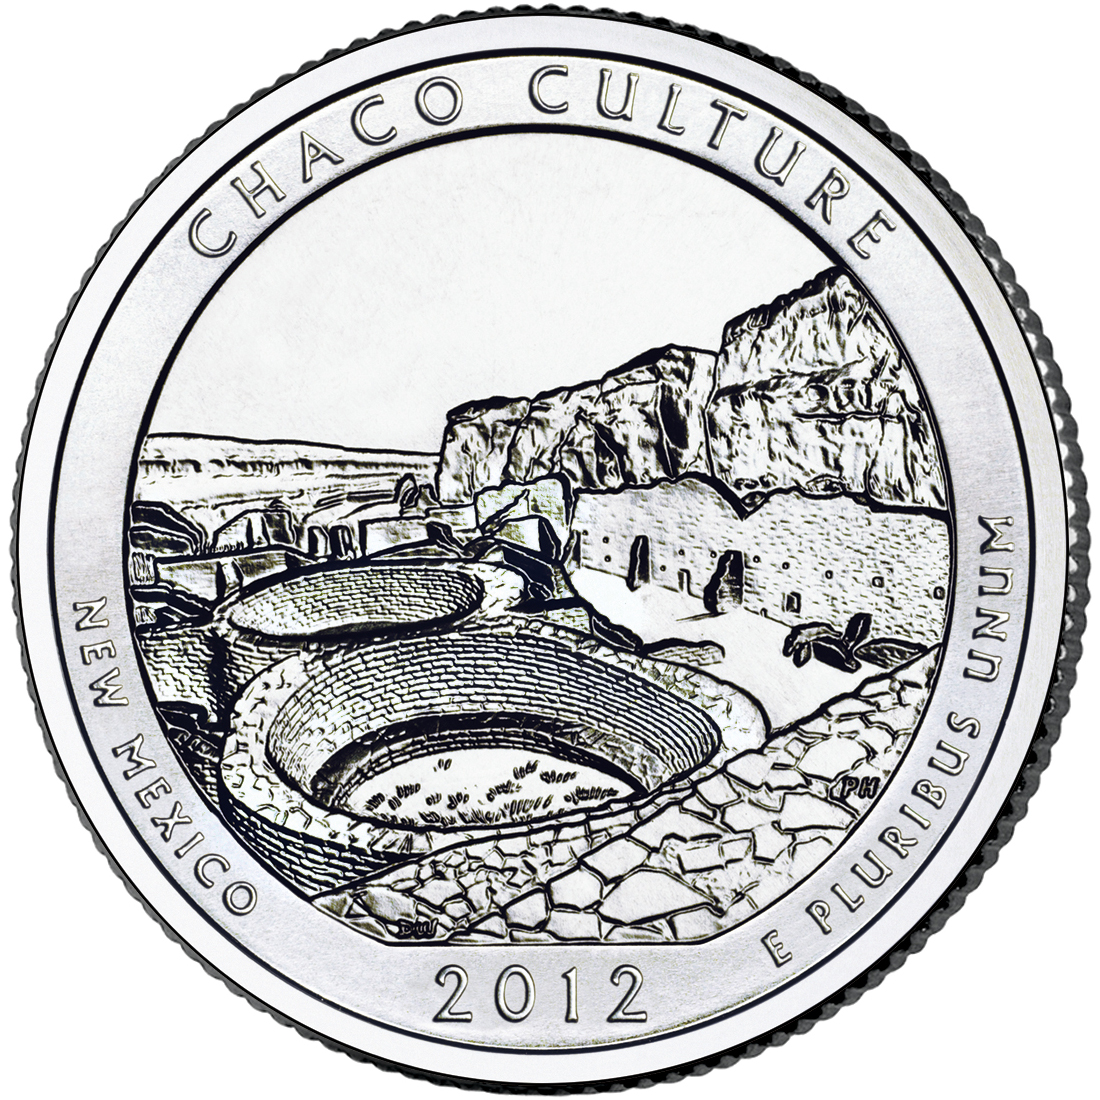 2012 New Mexico Chaco Culture National Historical Park Quarter Bottle Opener NEW 